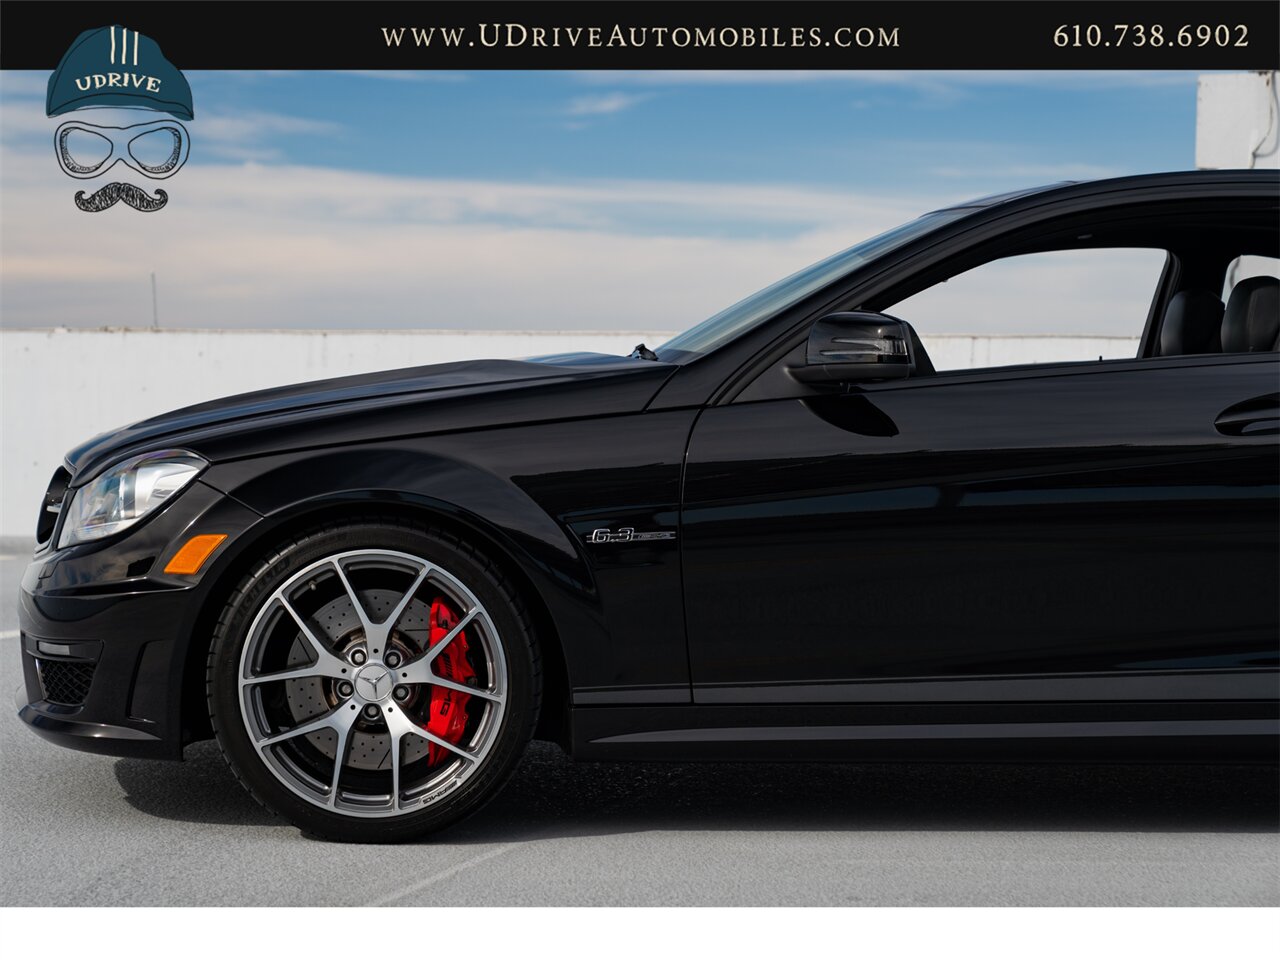 2015 Mercedes-Benz C63 AMG  Edition 507 17k Miles Pano Sunroof Locking Diff 507hp - Photo 10 - West Chester, PA 19382